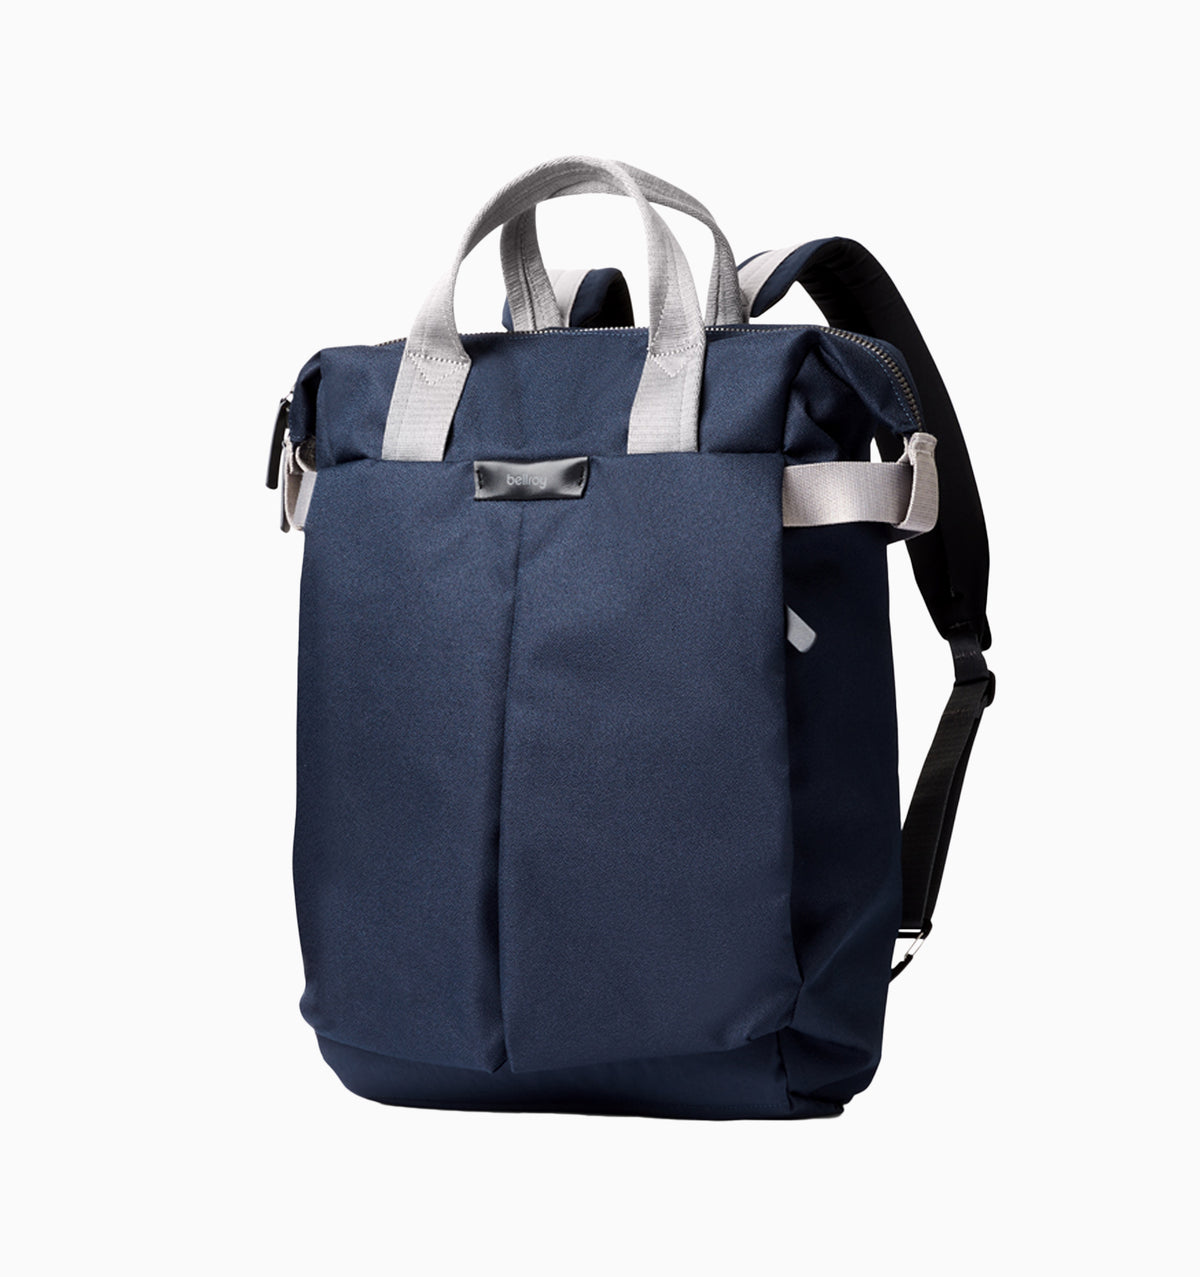 Bellroy Tokyo Totepack Compact - Navy